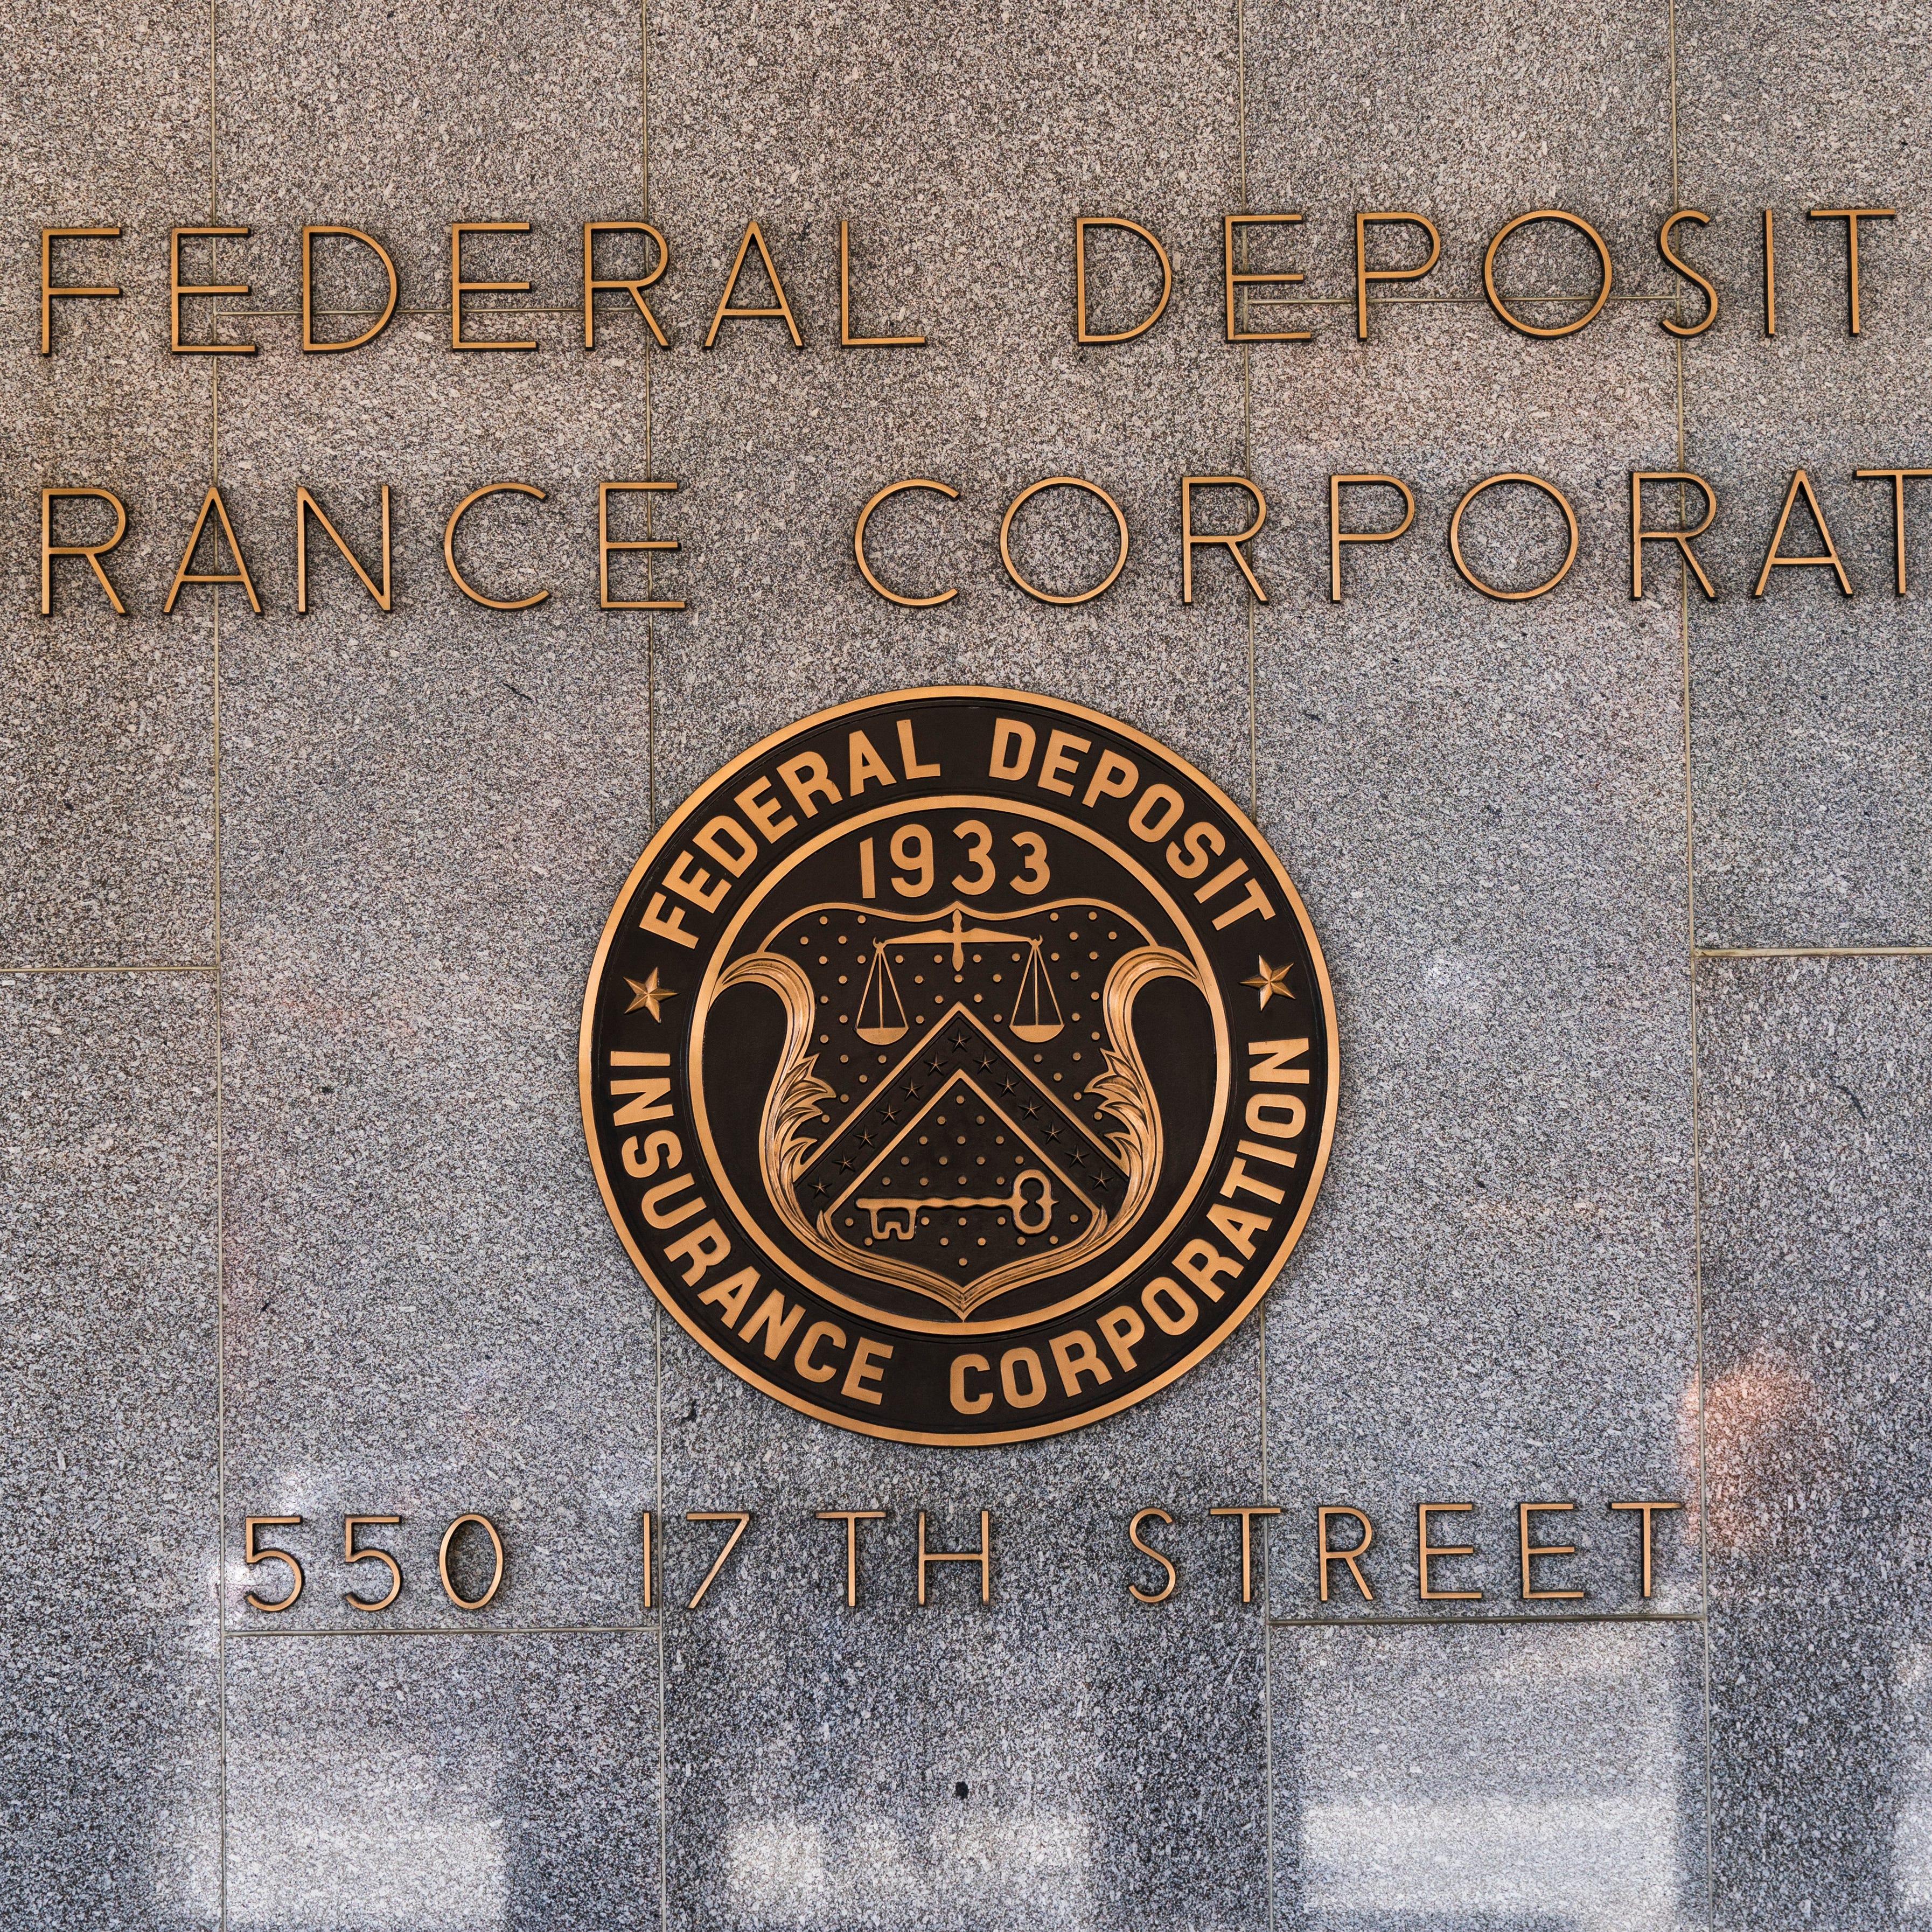 The Federal Deposit Insurance Corporation (FDIC) seal is shown outside its headquarters, Tuesday, March 14, 2023.